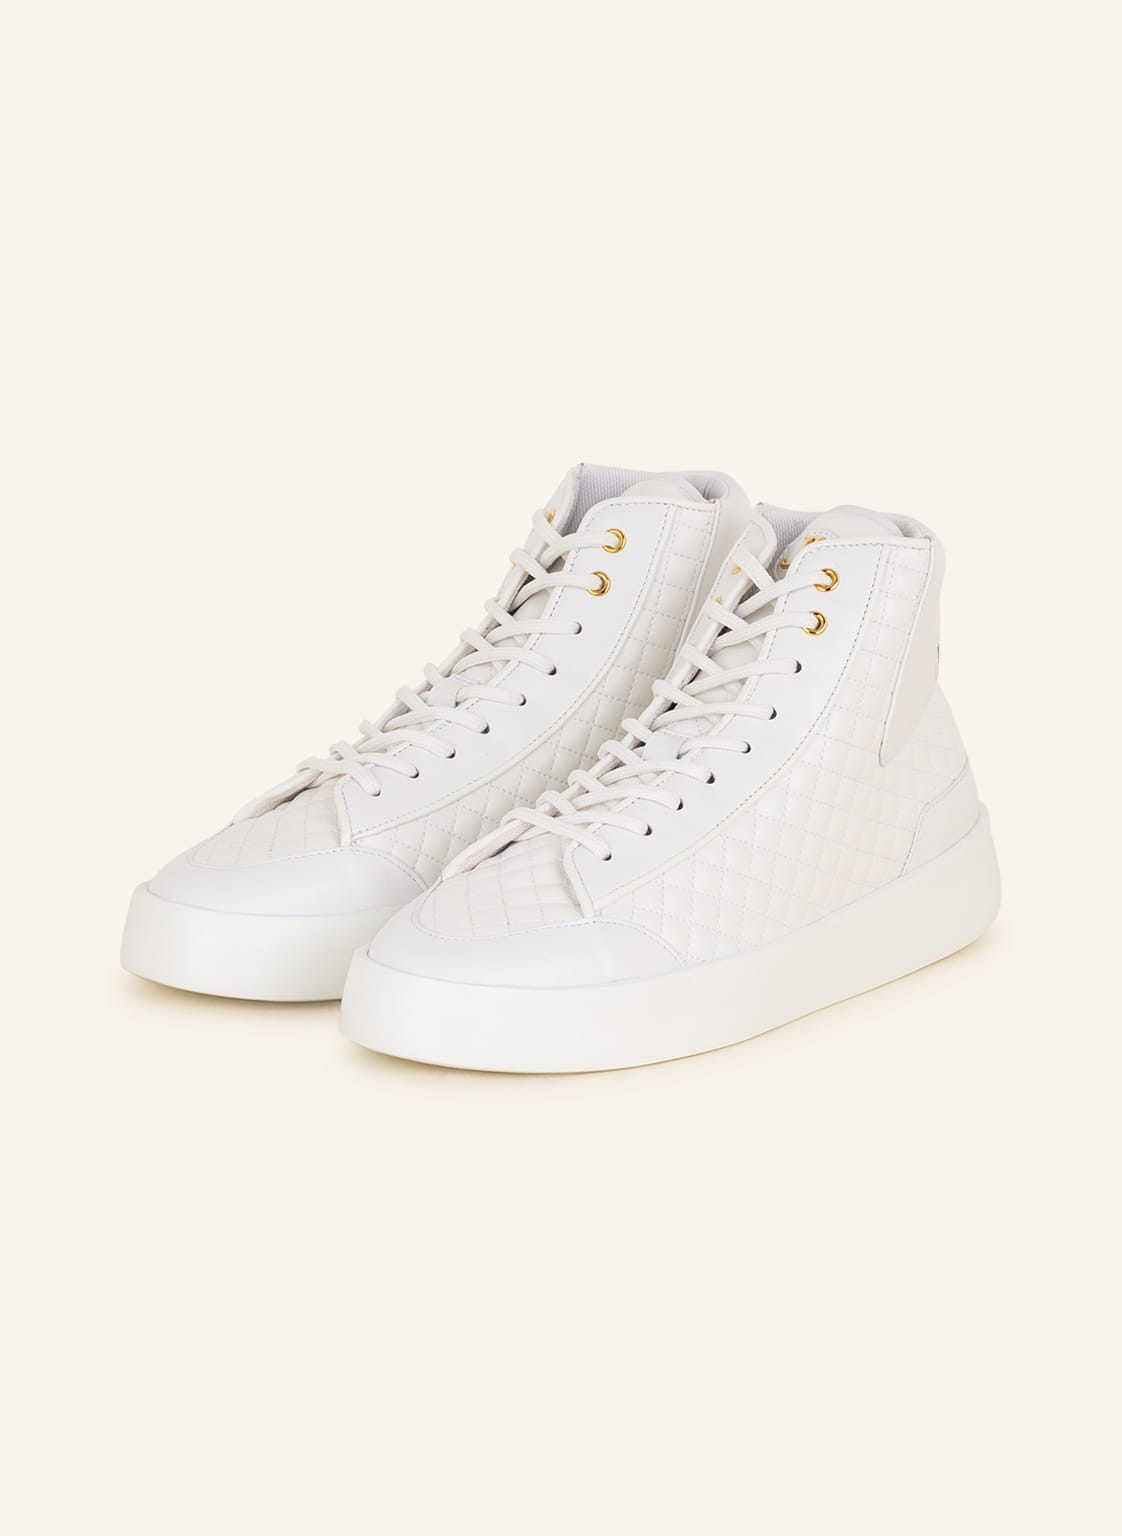 Image of Leandro Lopes Hightop-Sneaker Staff weiss